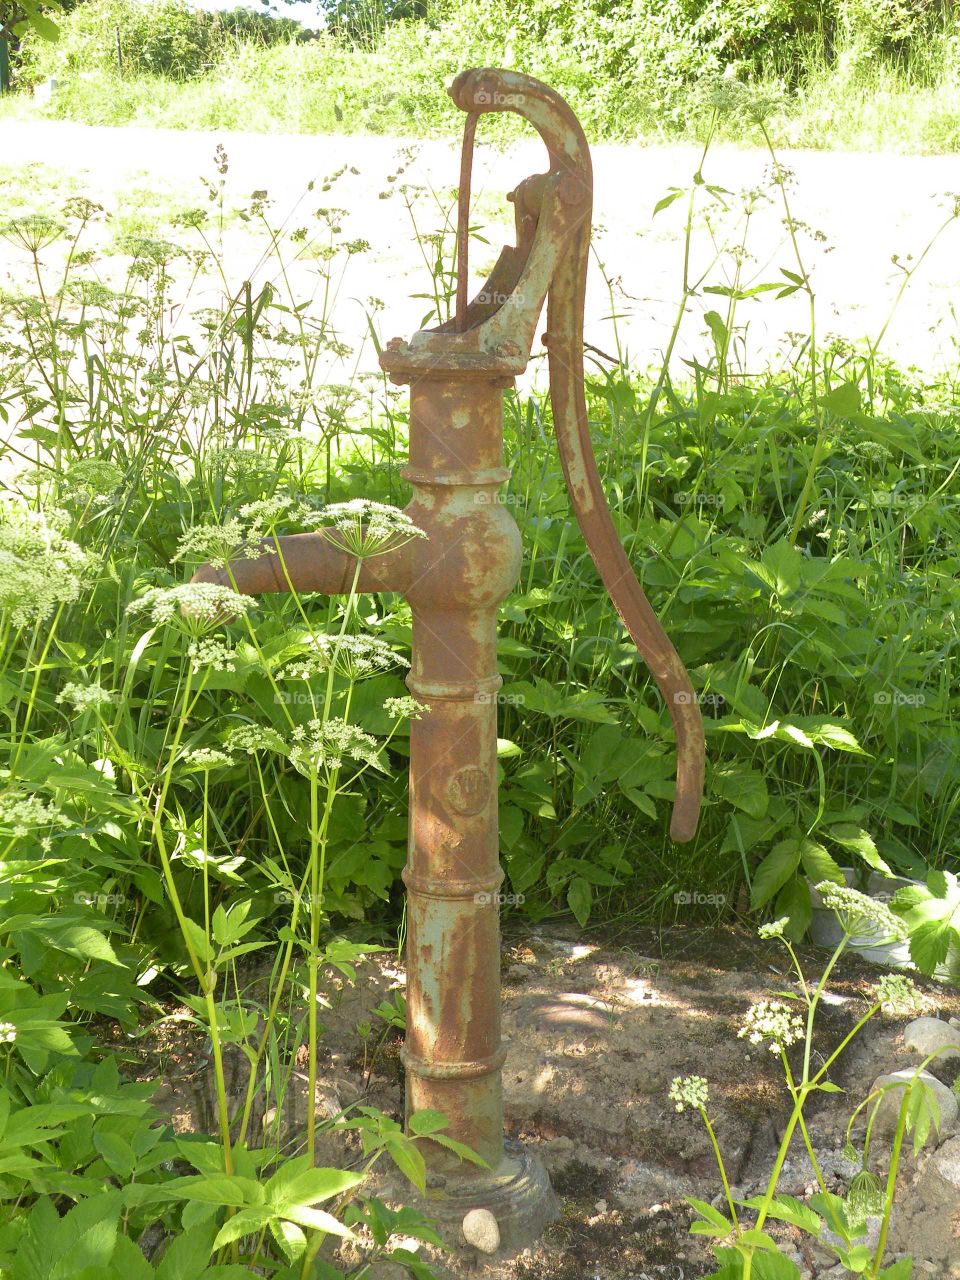 Rusty old water pump